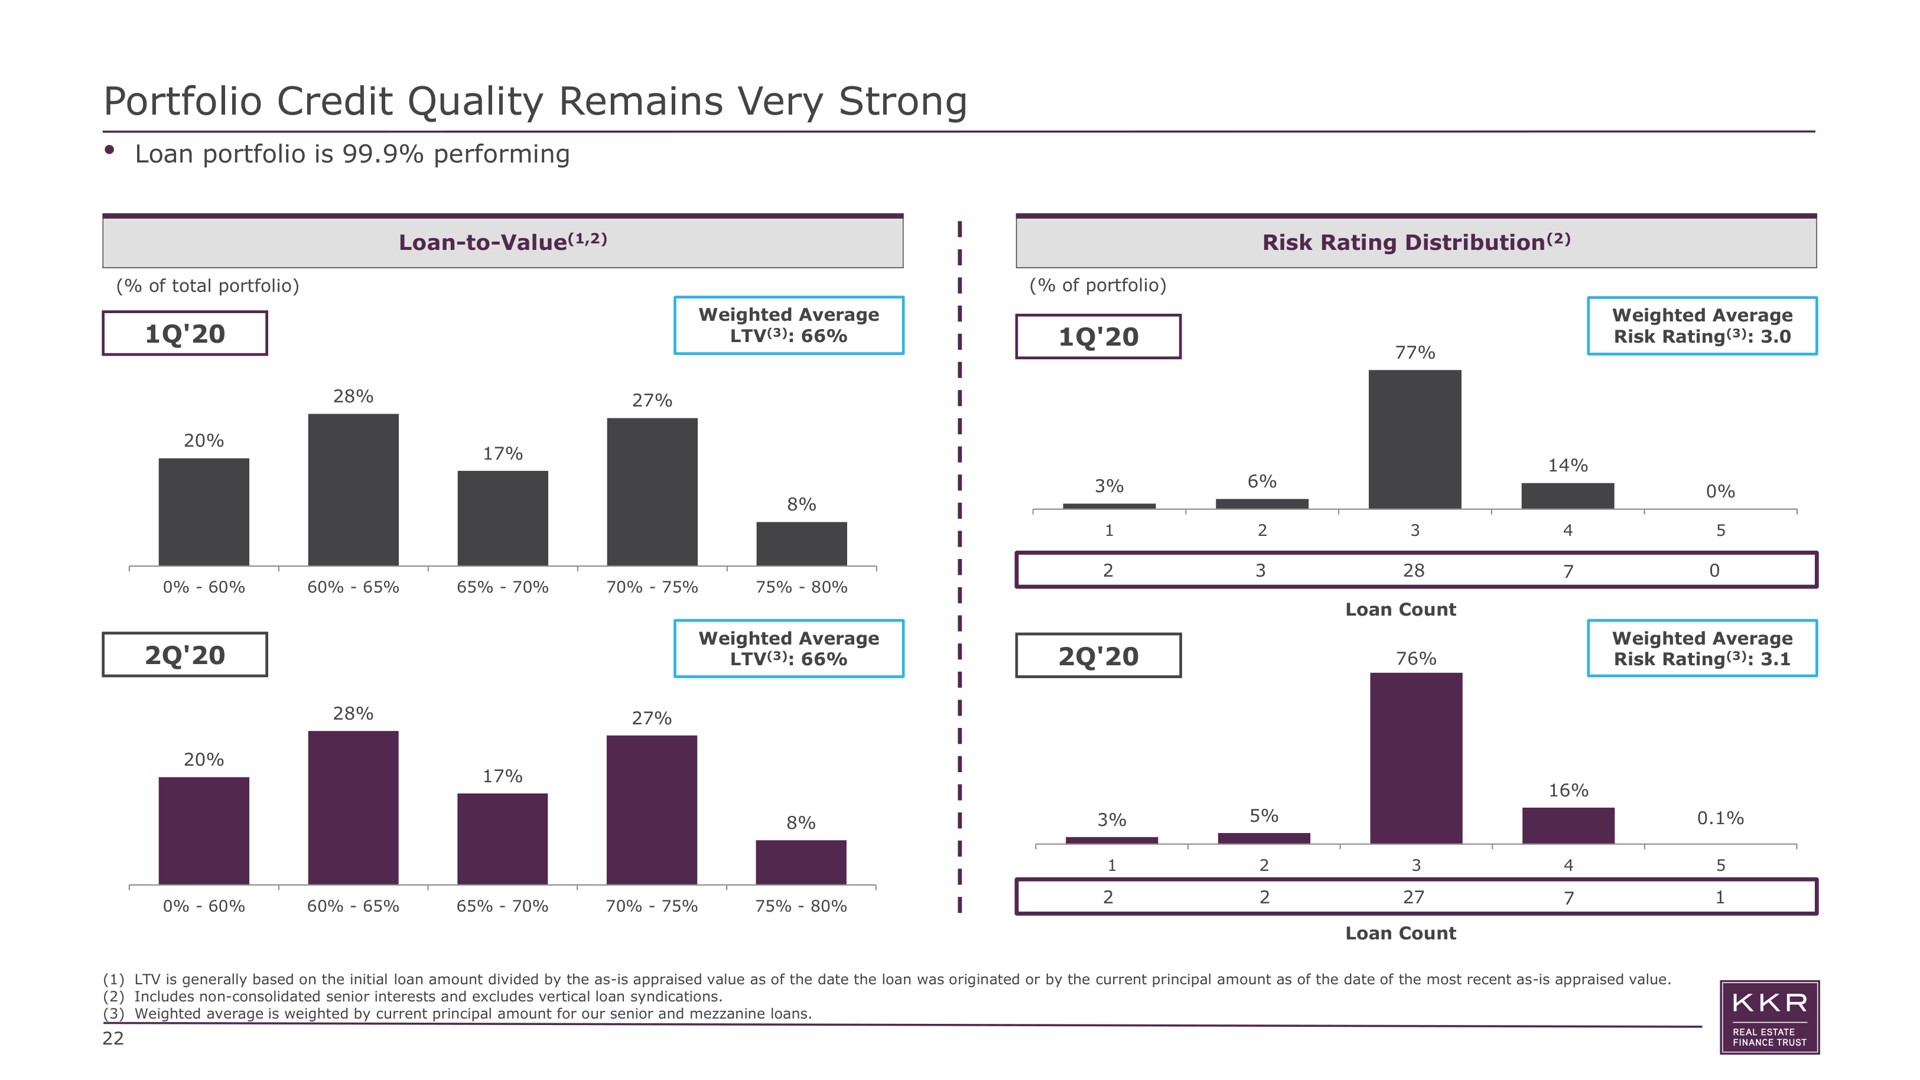 portfolio credit quality remains very strong loan is performing | KKR Real Estate Finance Trust